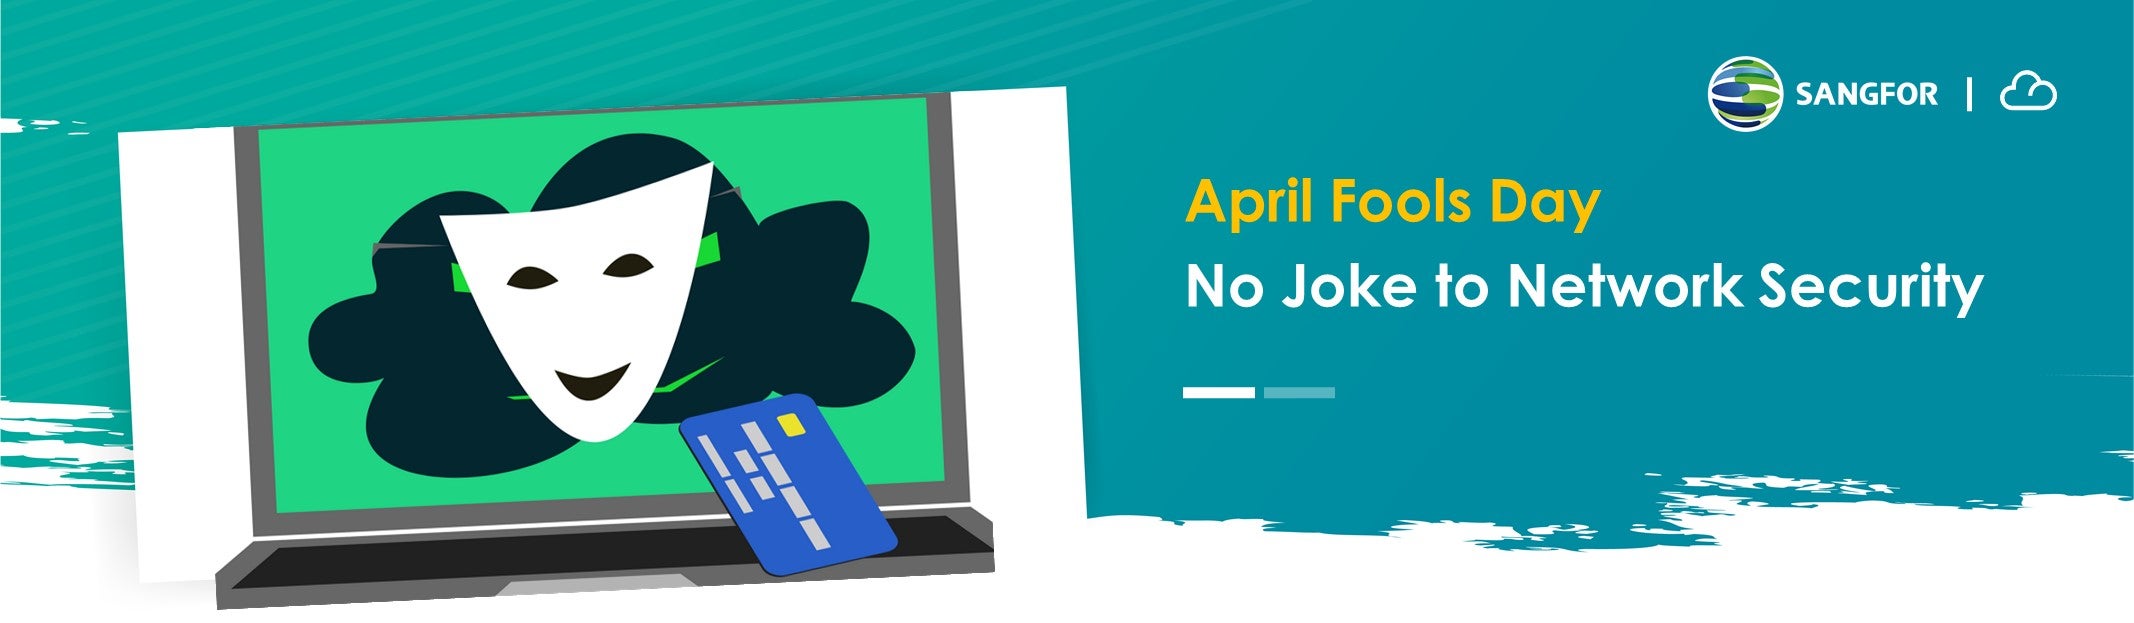 April Fools Day Network Security